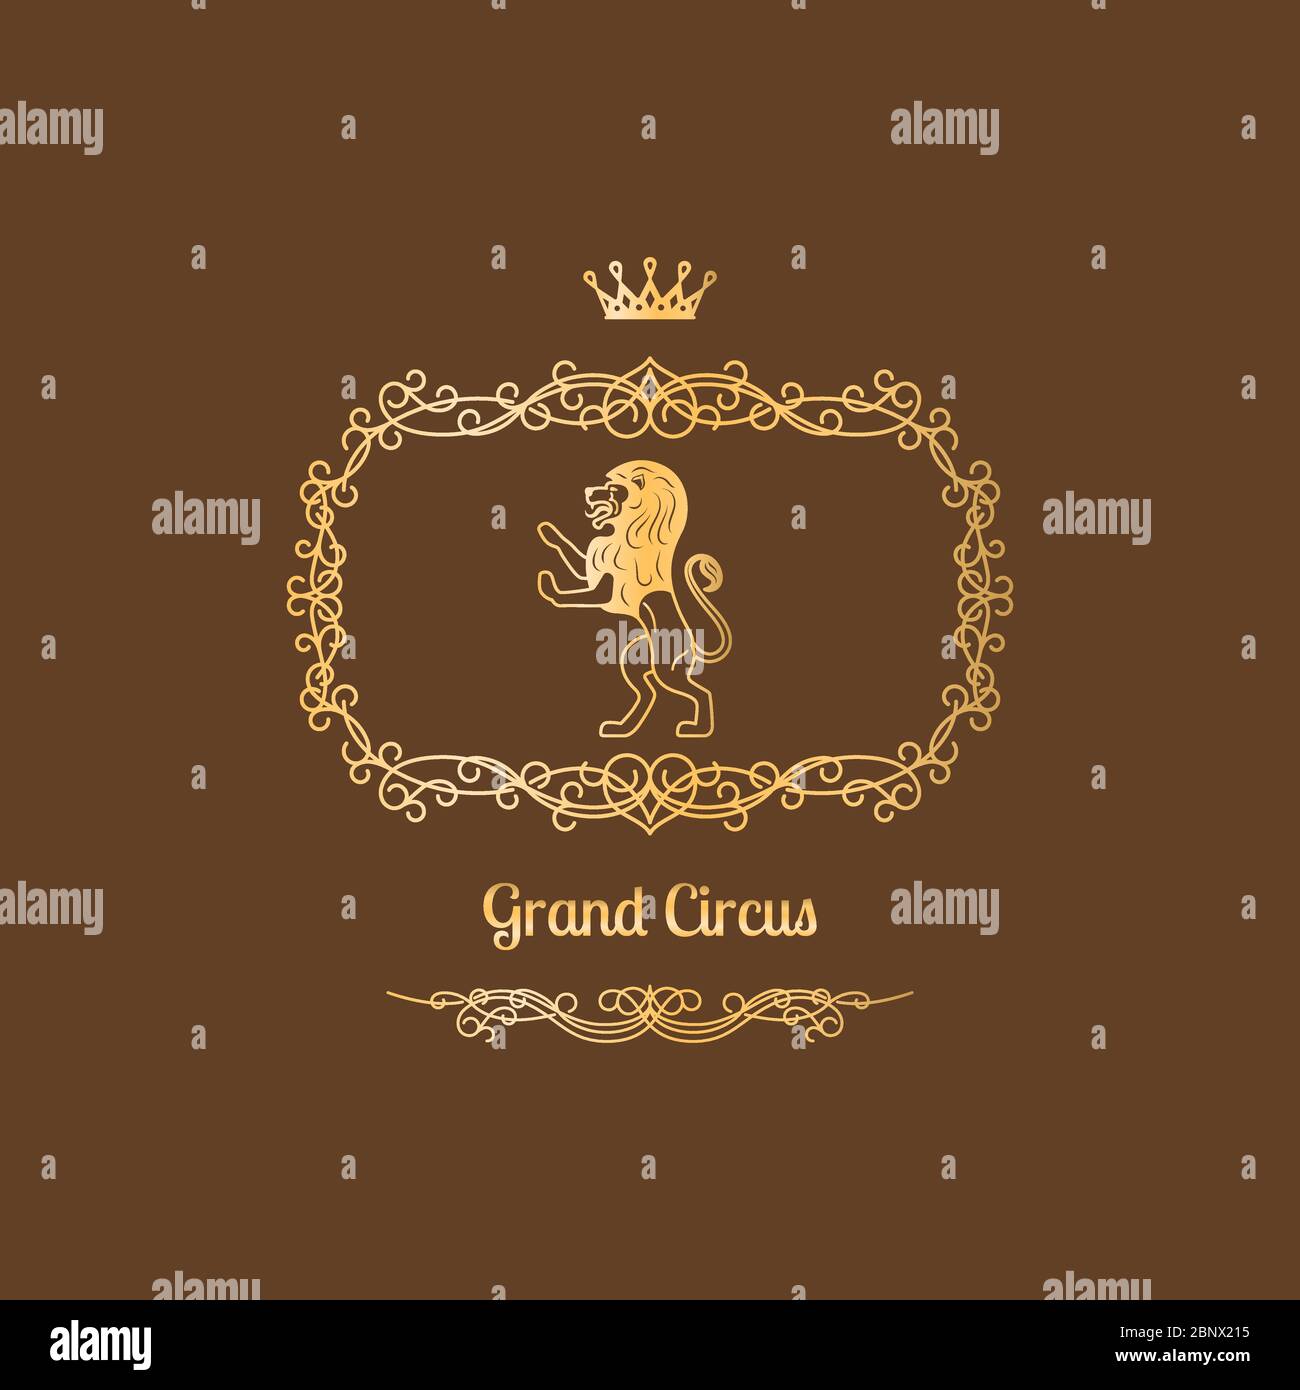 Logo design for Circus with vintage royalty frame, crown and royal lion. Vector illustration Stock Vector